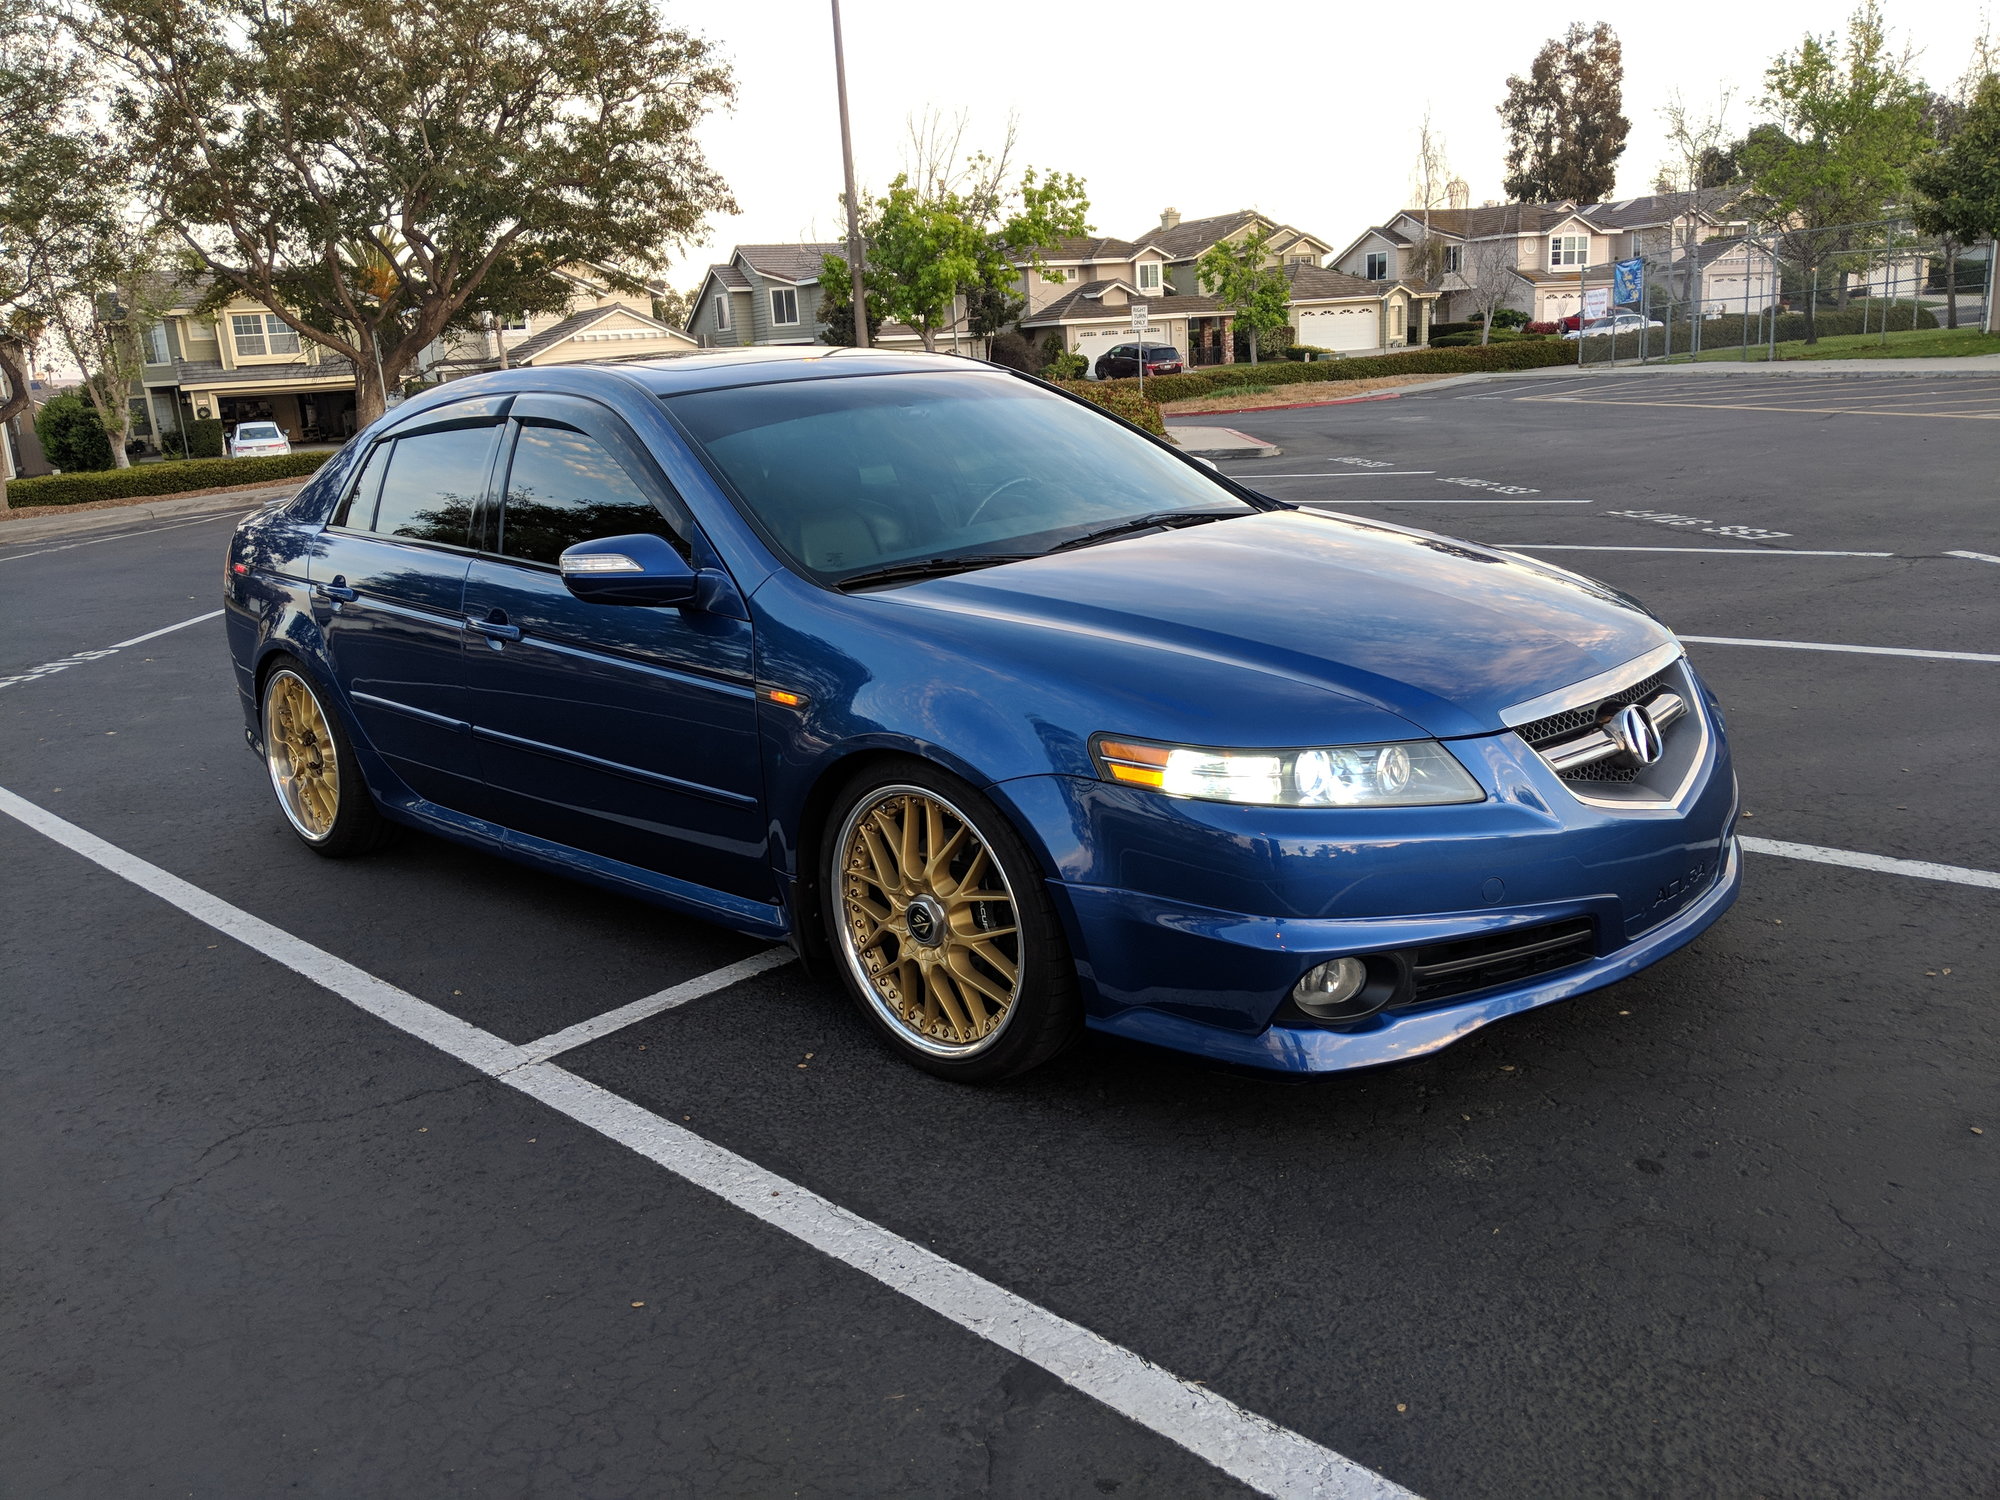 2007 Acura TL - CLOSED: Bagged 07 Acura TL Type S - Kinetic Blue - Super Clean - Used - VIN 19UUA76537A008822 - 128,500 Miles - 6 cyl - 2WD - Automatic - Sedan - Blue - San Diego, CA 92128, United States